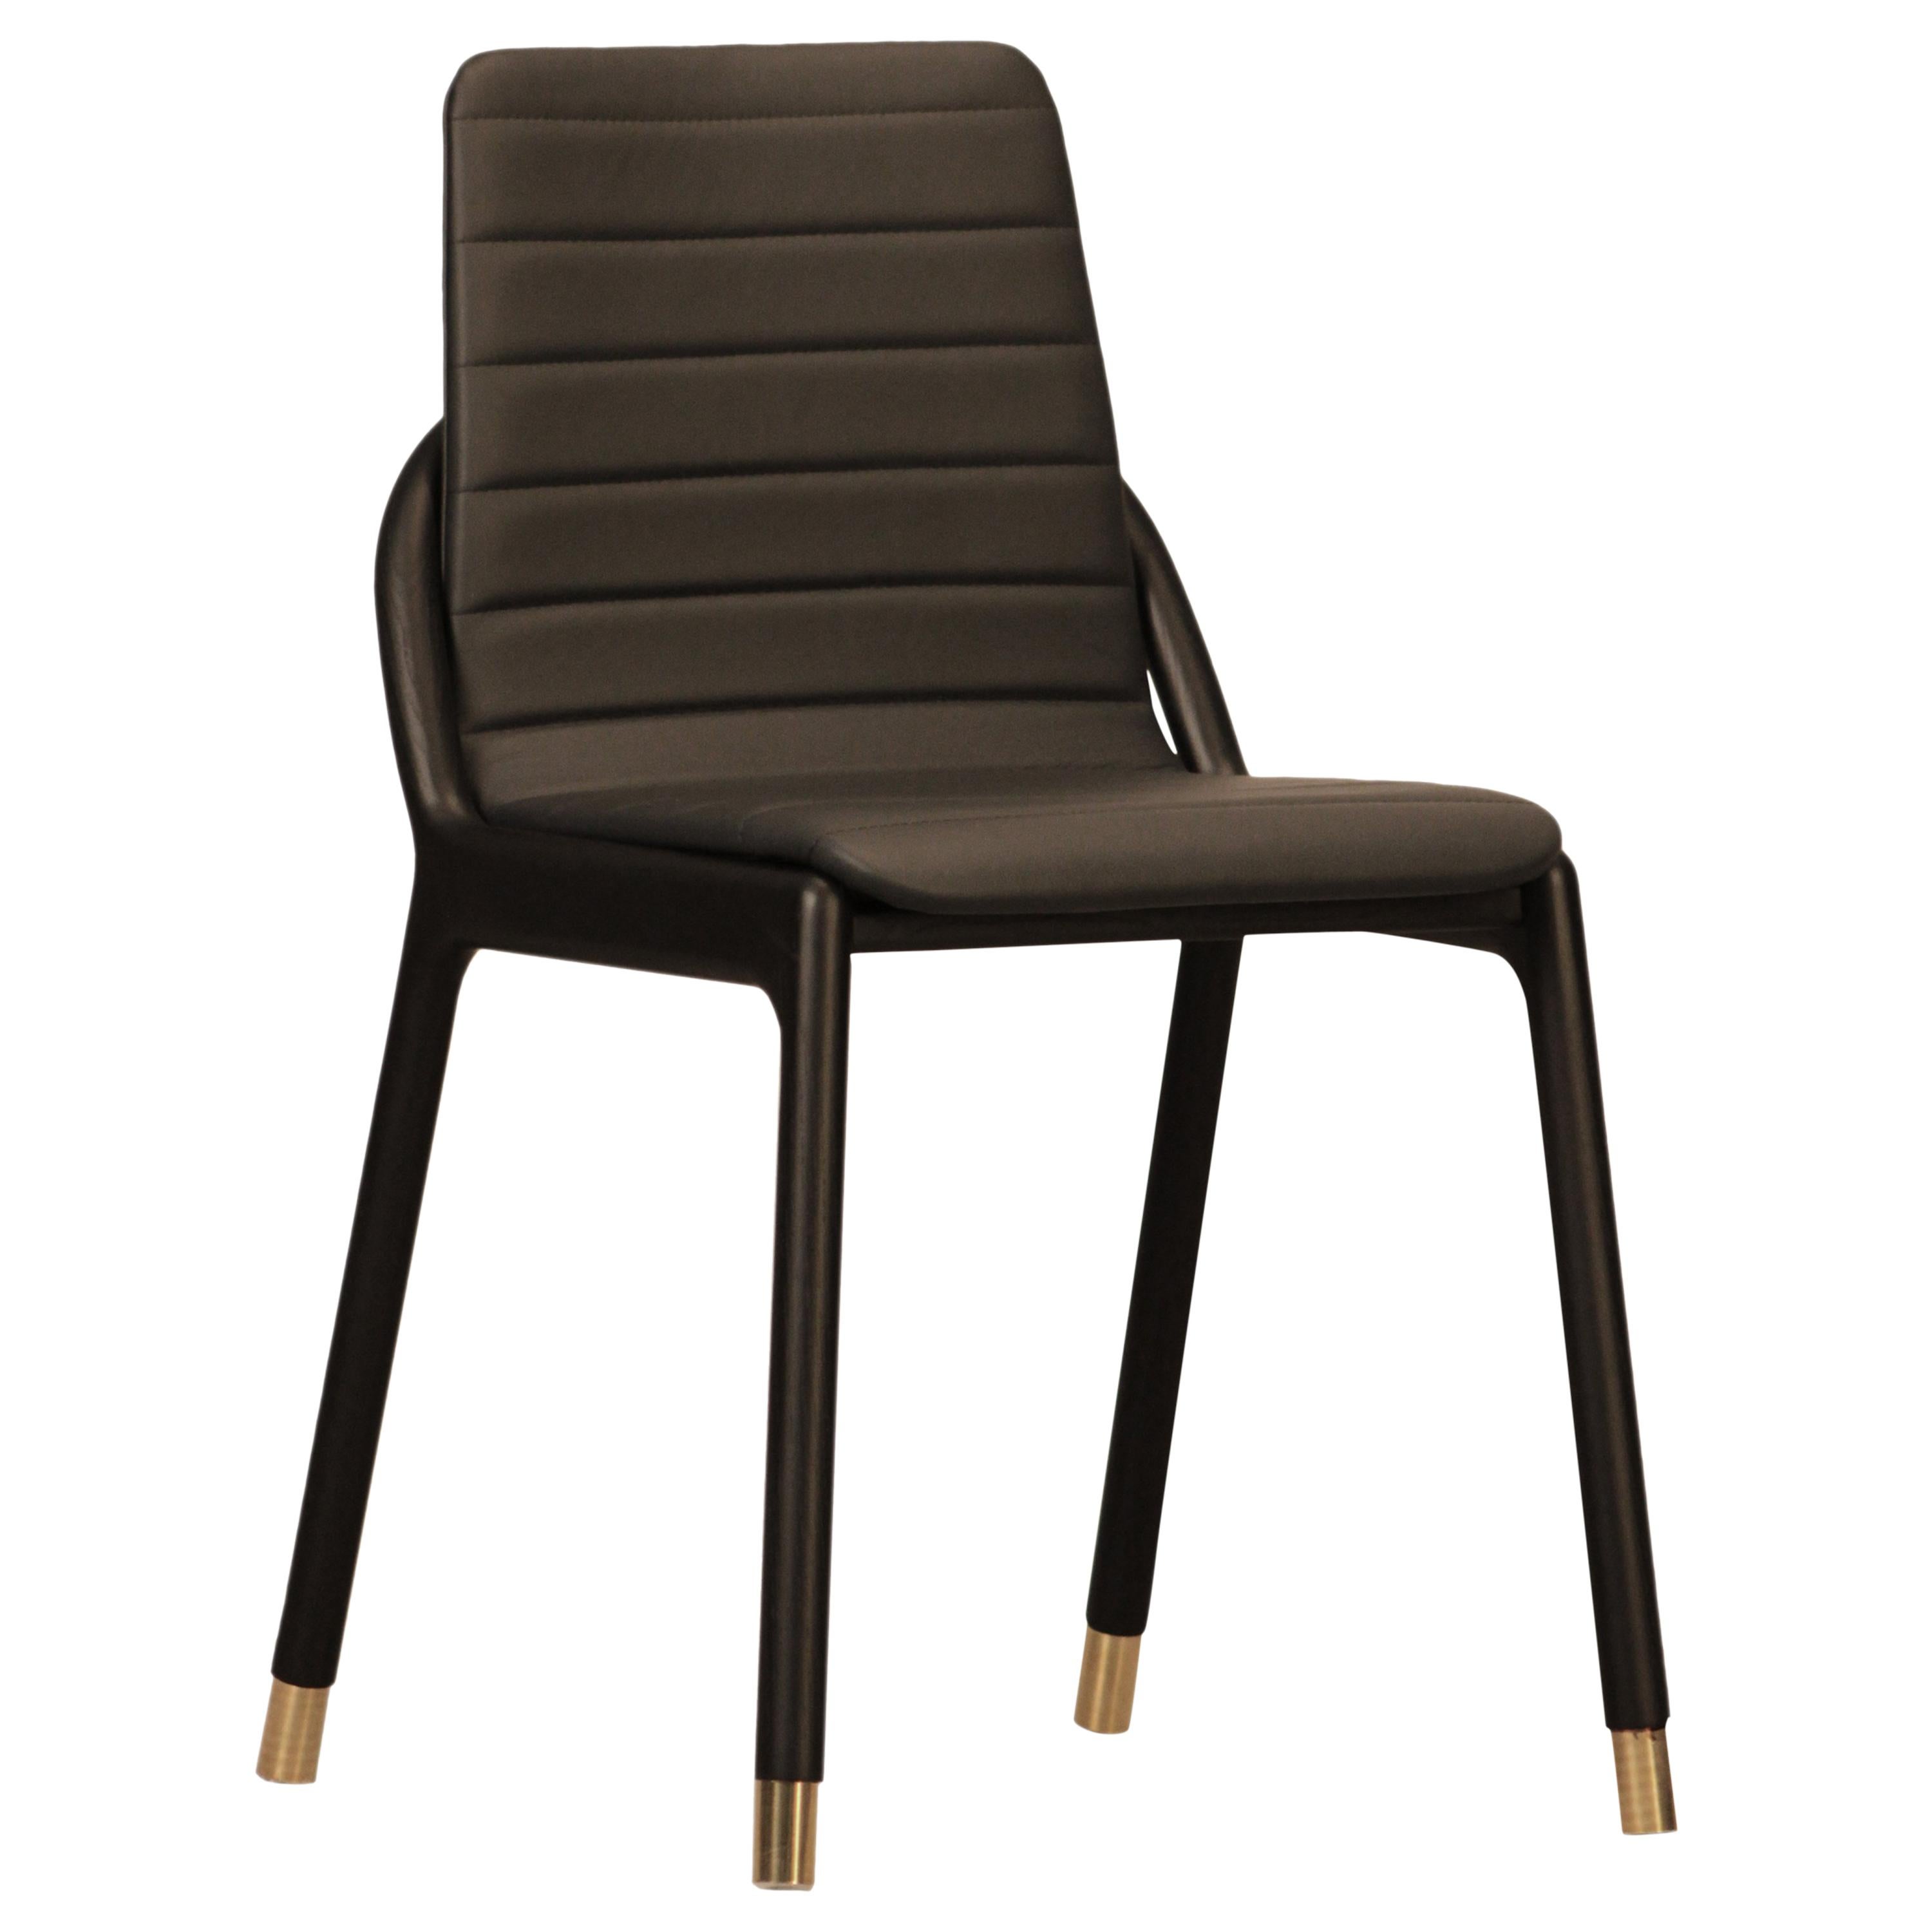 Joyce Contemporary Upholstered Dining Chair in Ashwood and Tufted Leather Seat